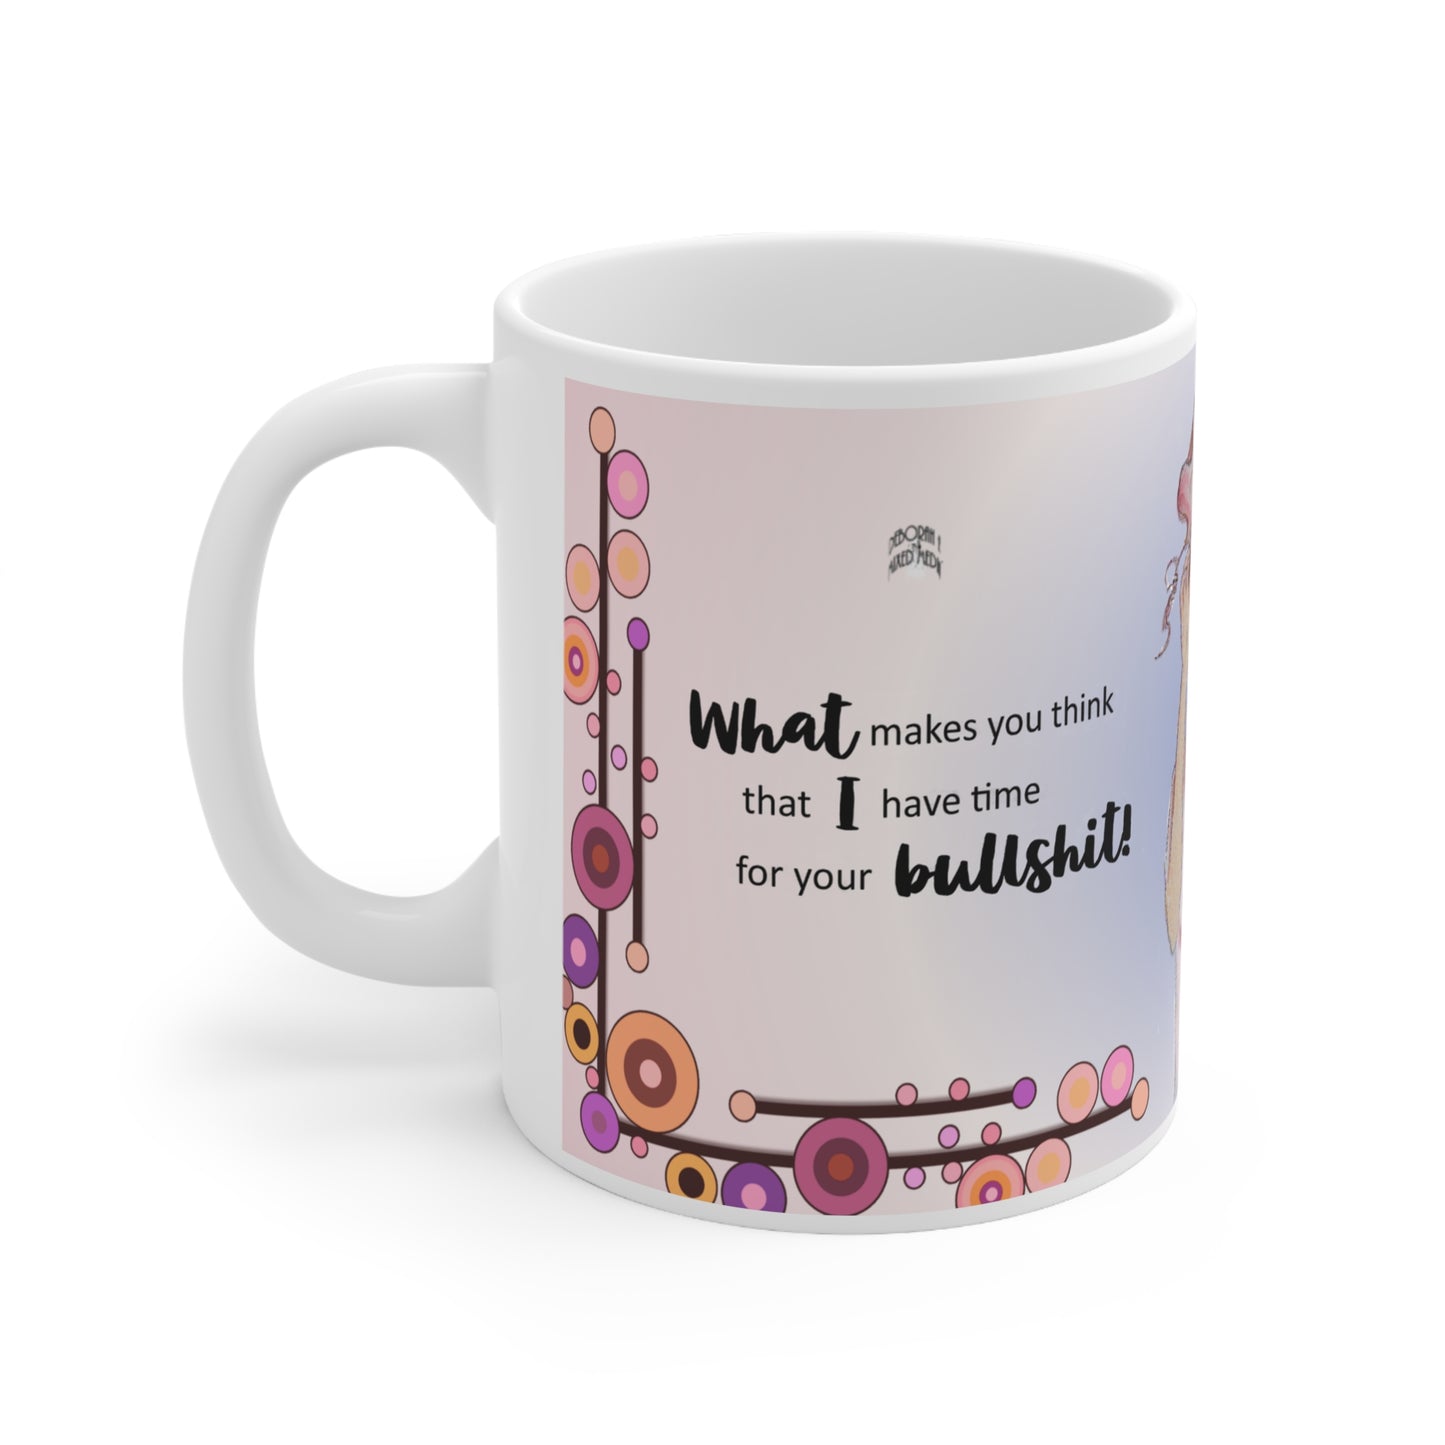 "What Makes You Think I Have Time For Your Bullshit?" (gwc) Mug